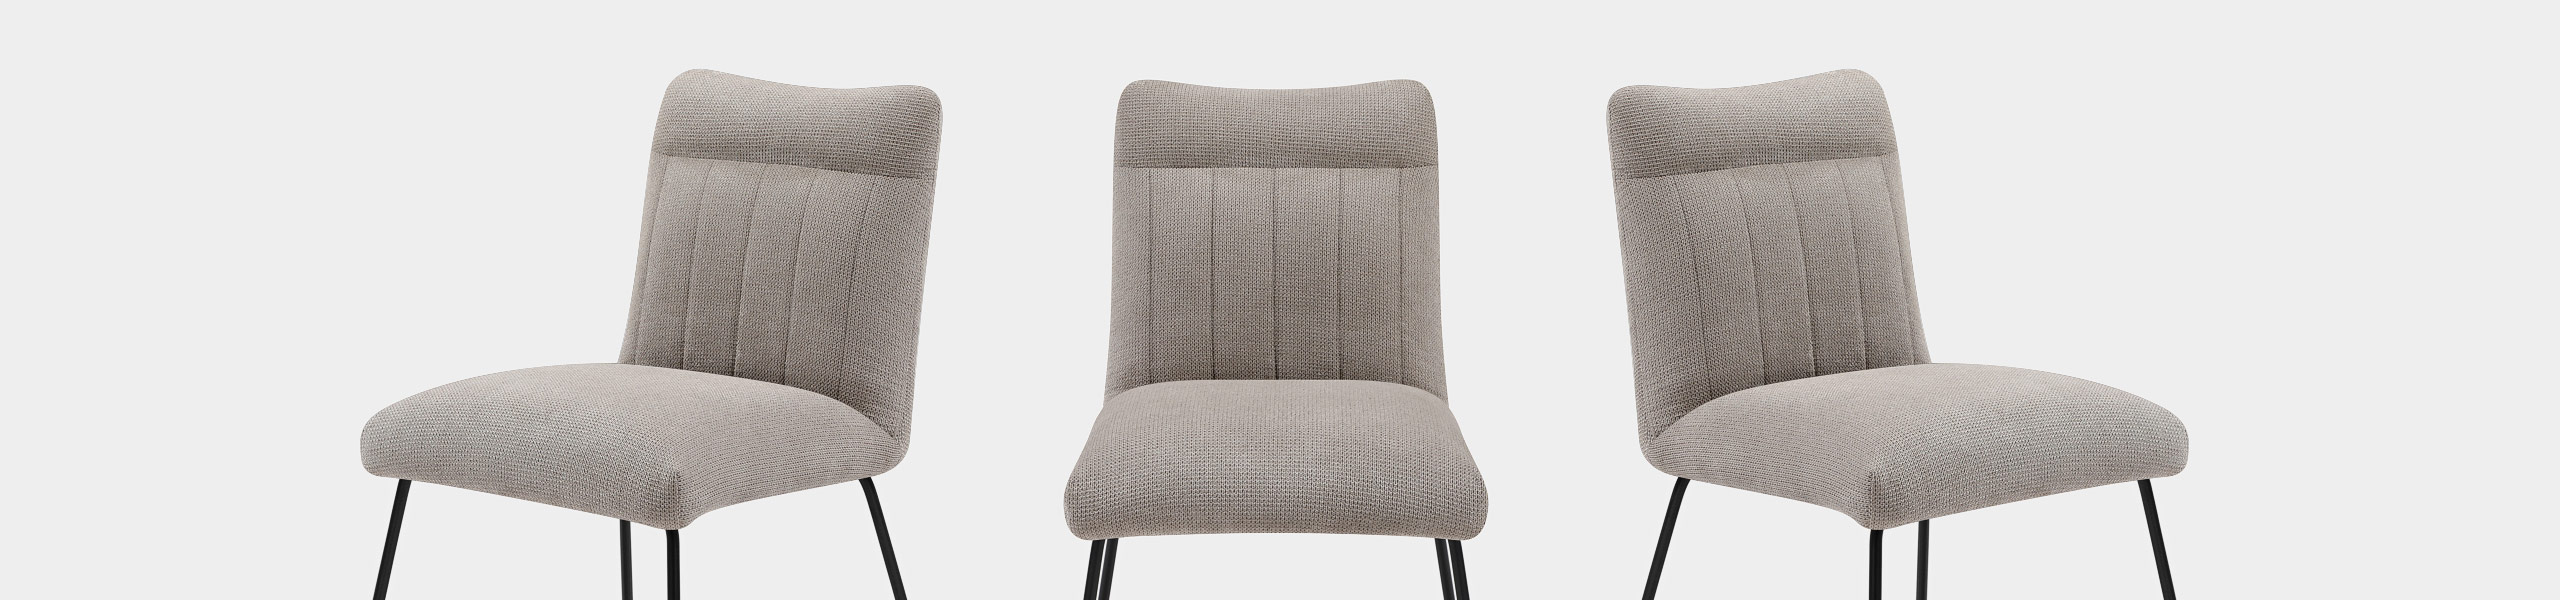 Milo Dining Chair Tweed Fabric Video Banner